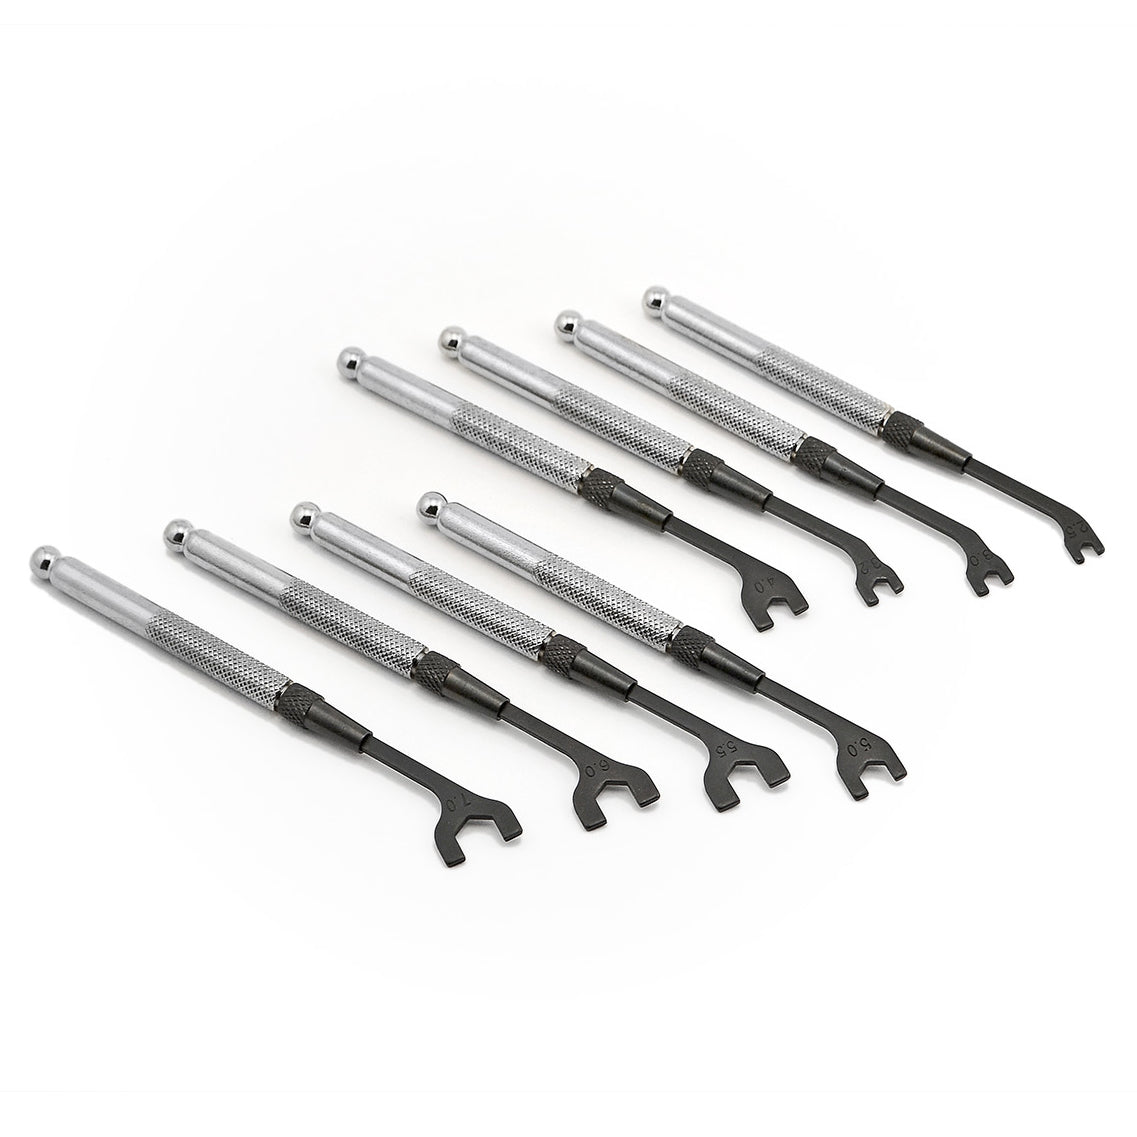 8 - piece Open Ended Wrench Metric Set - Micro - Mark Screwdrivers